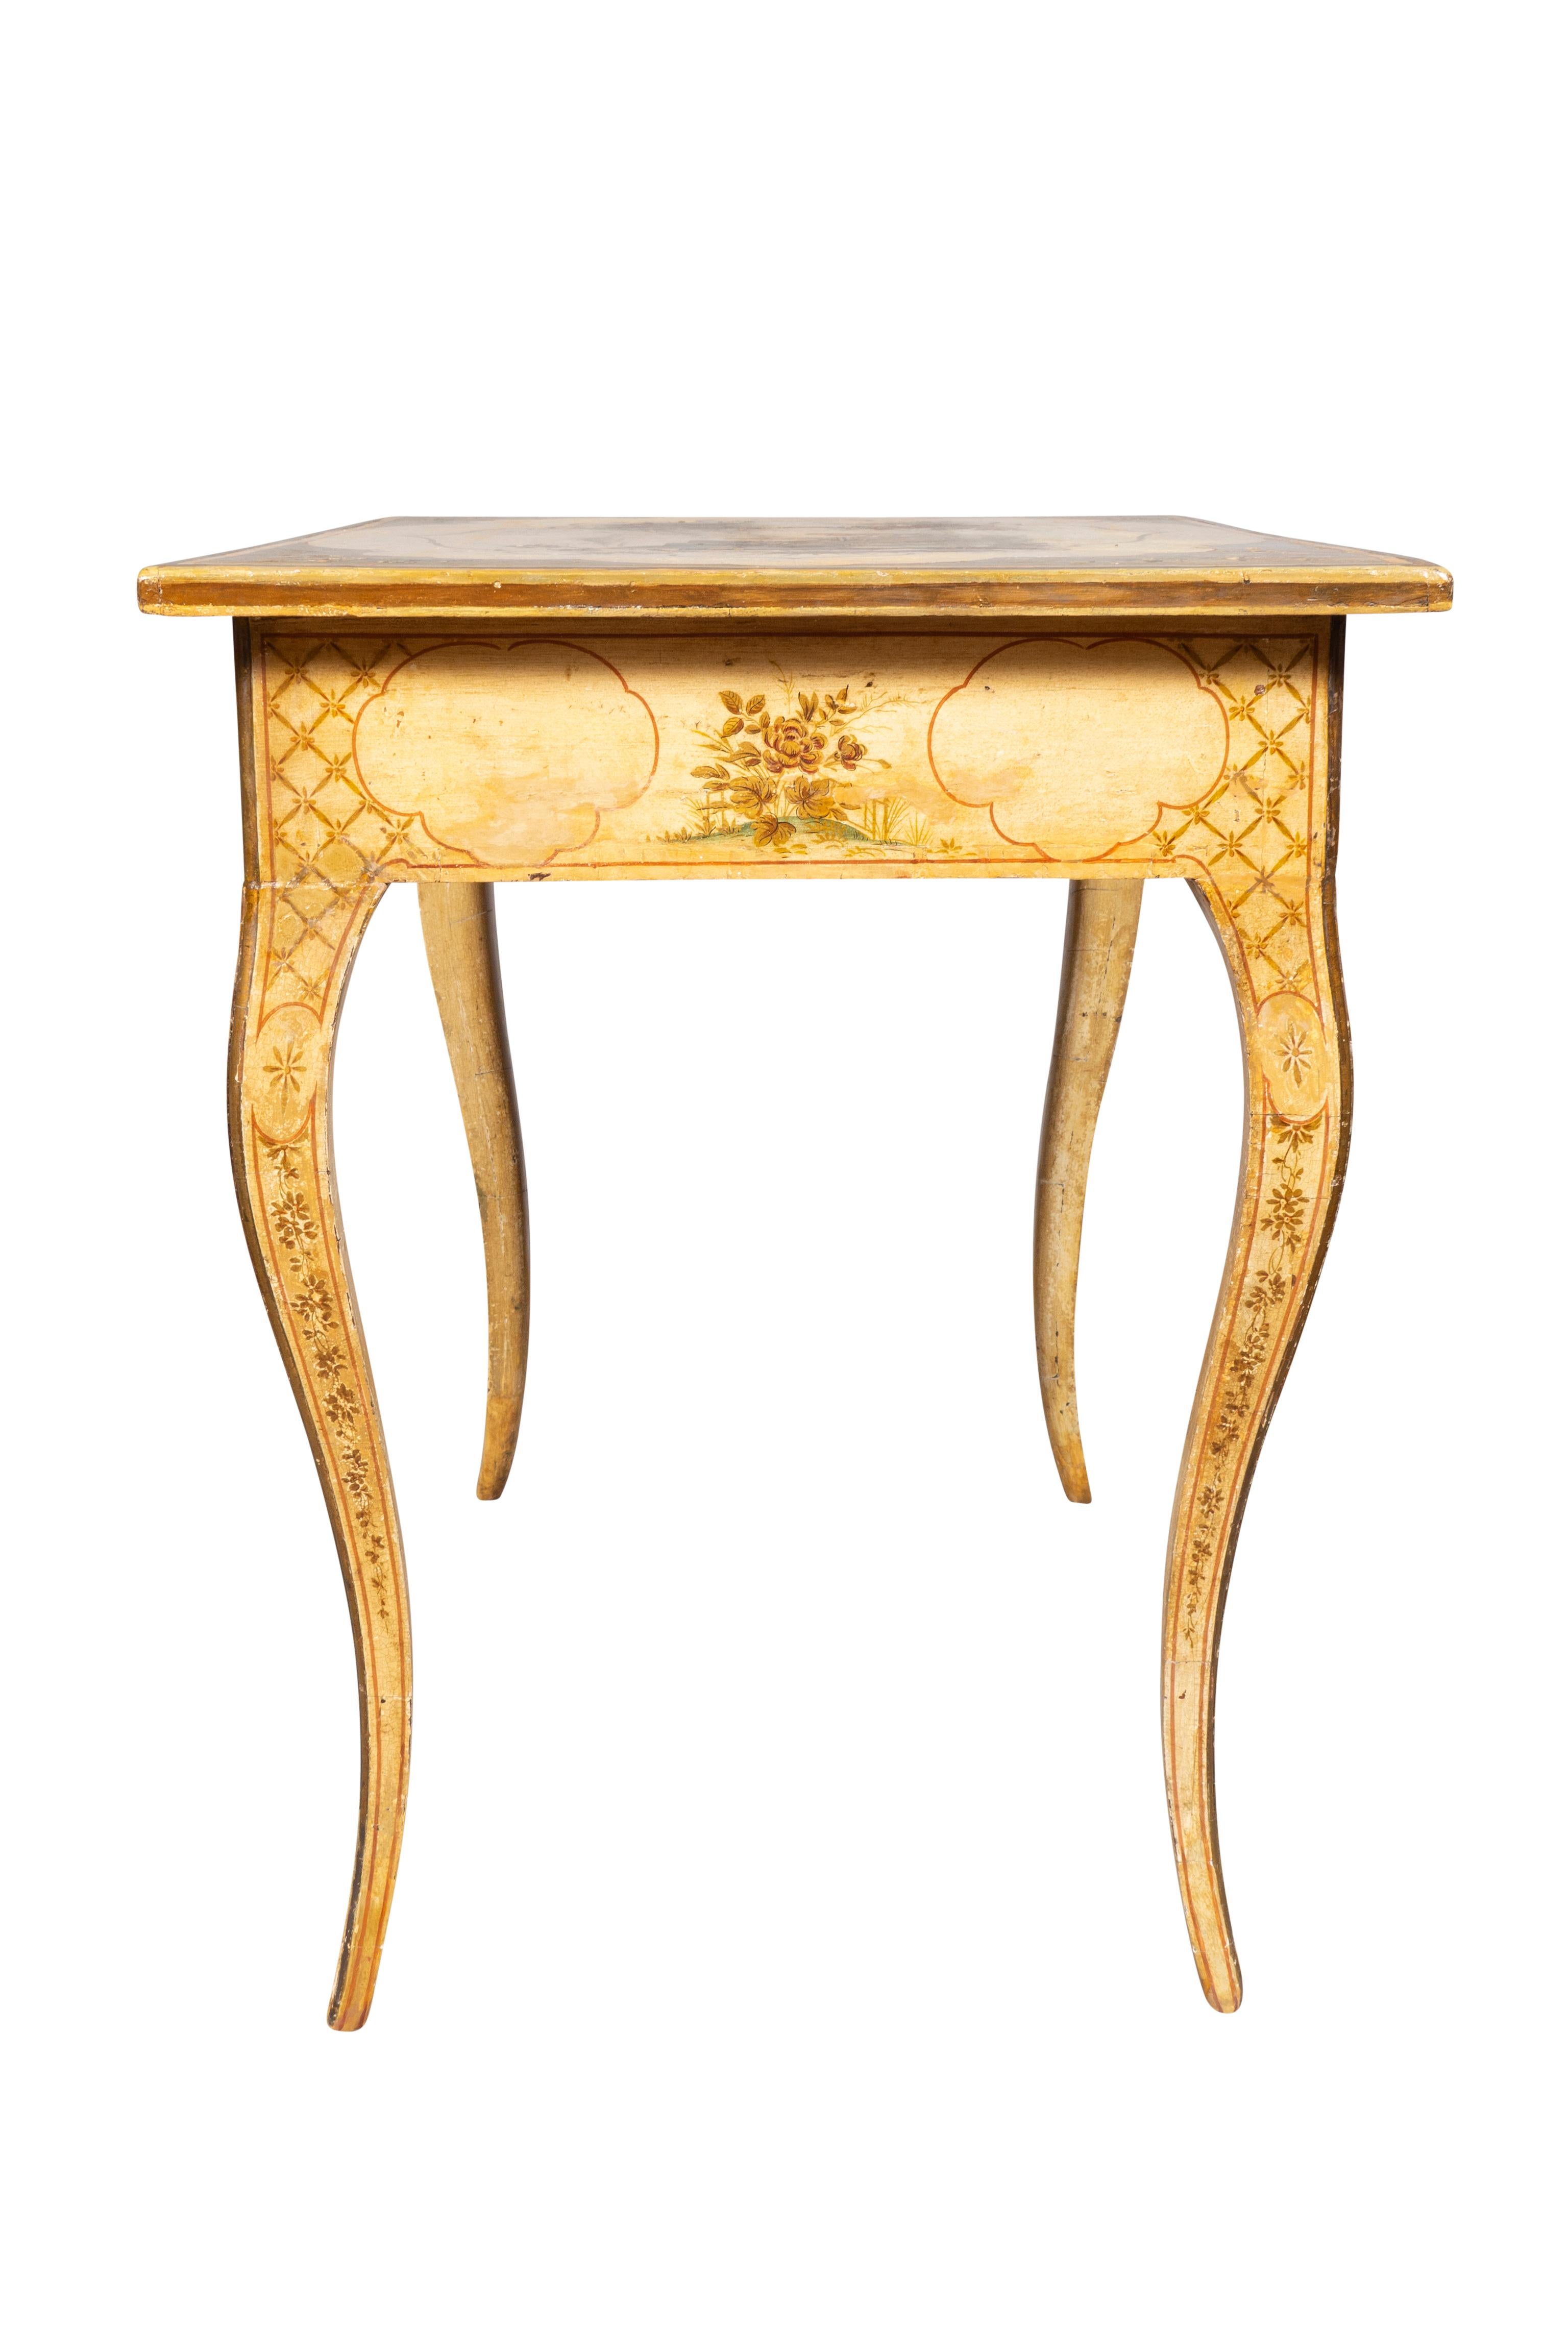 Pine Italian Rococo Chinoiserie Decorated Table For Sale